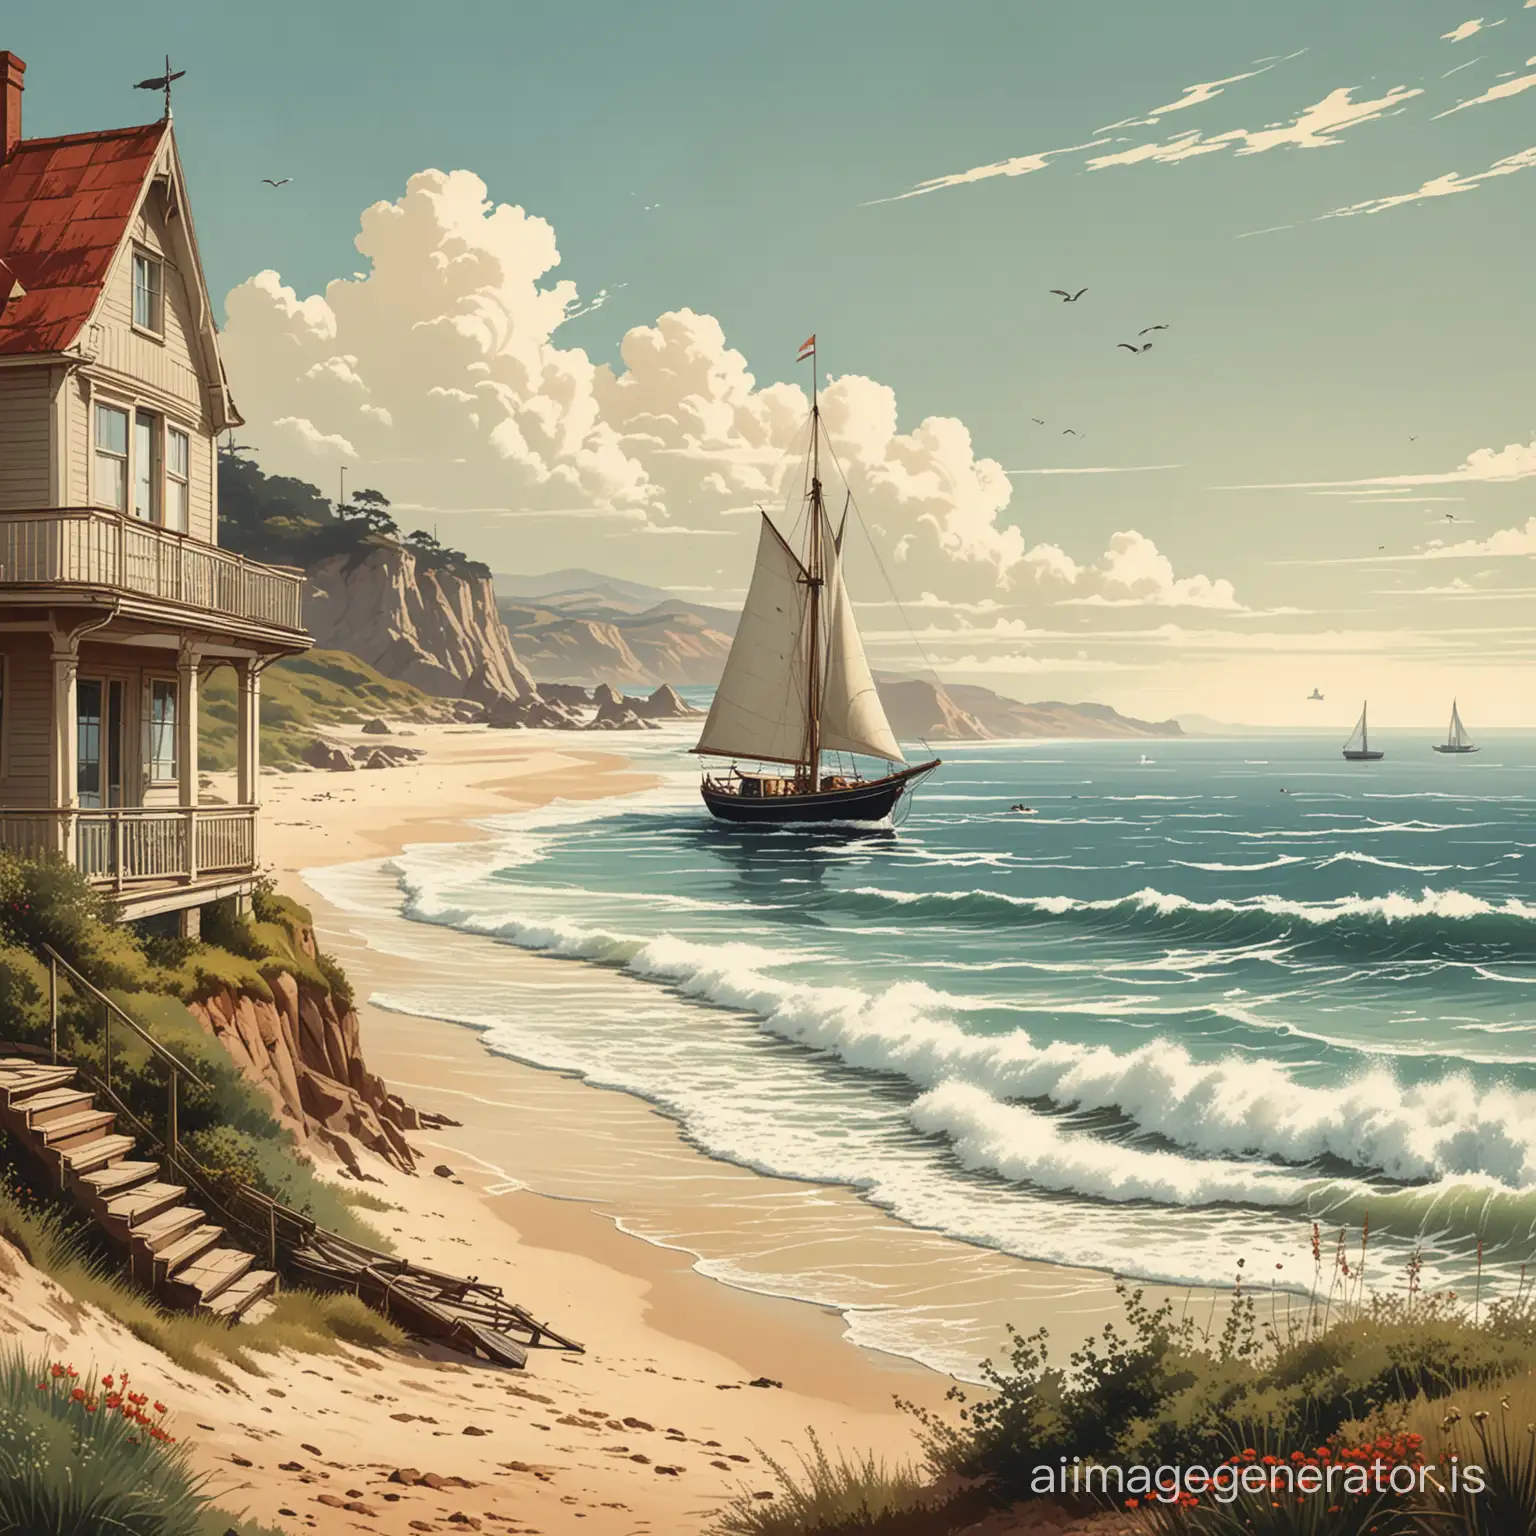 Vintage-1920s-Beach-Vacation-Home-with-Lonely-Sailboat